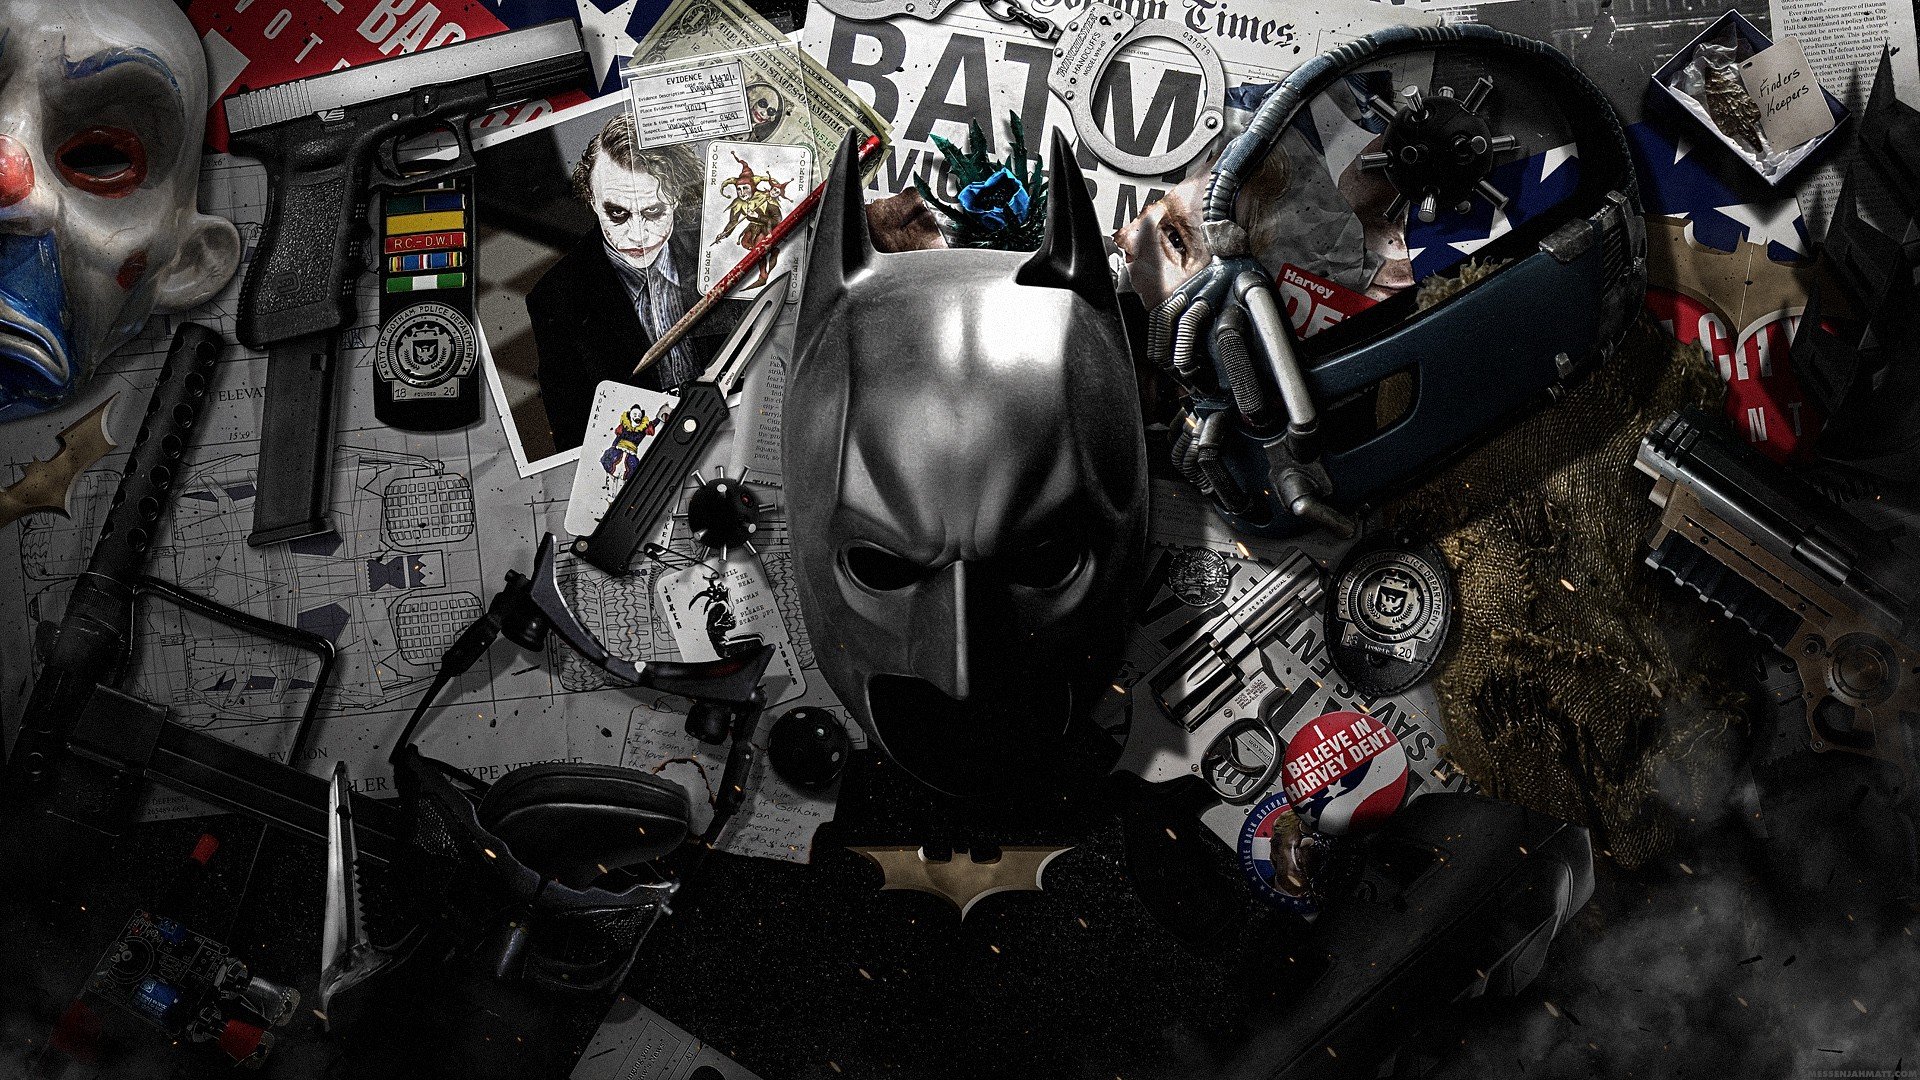 The Dark Knight Rises download the new version for iphone